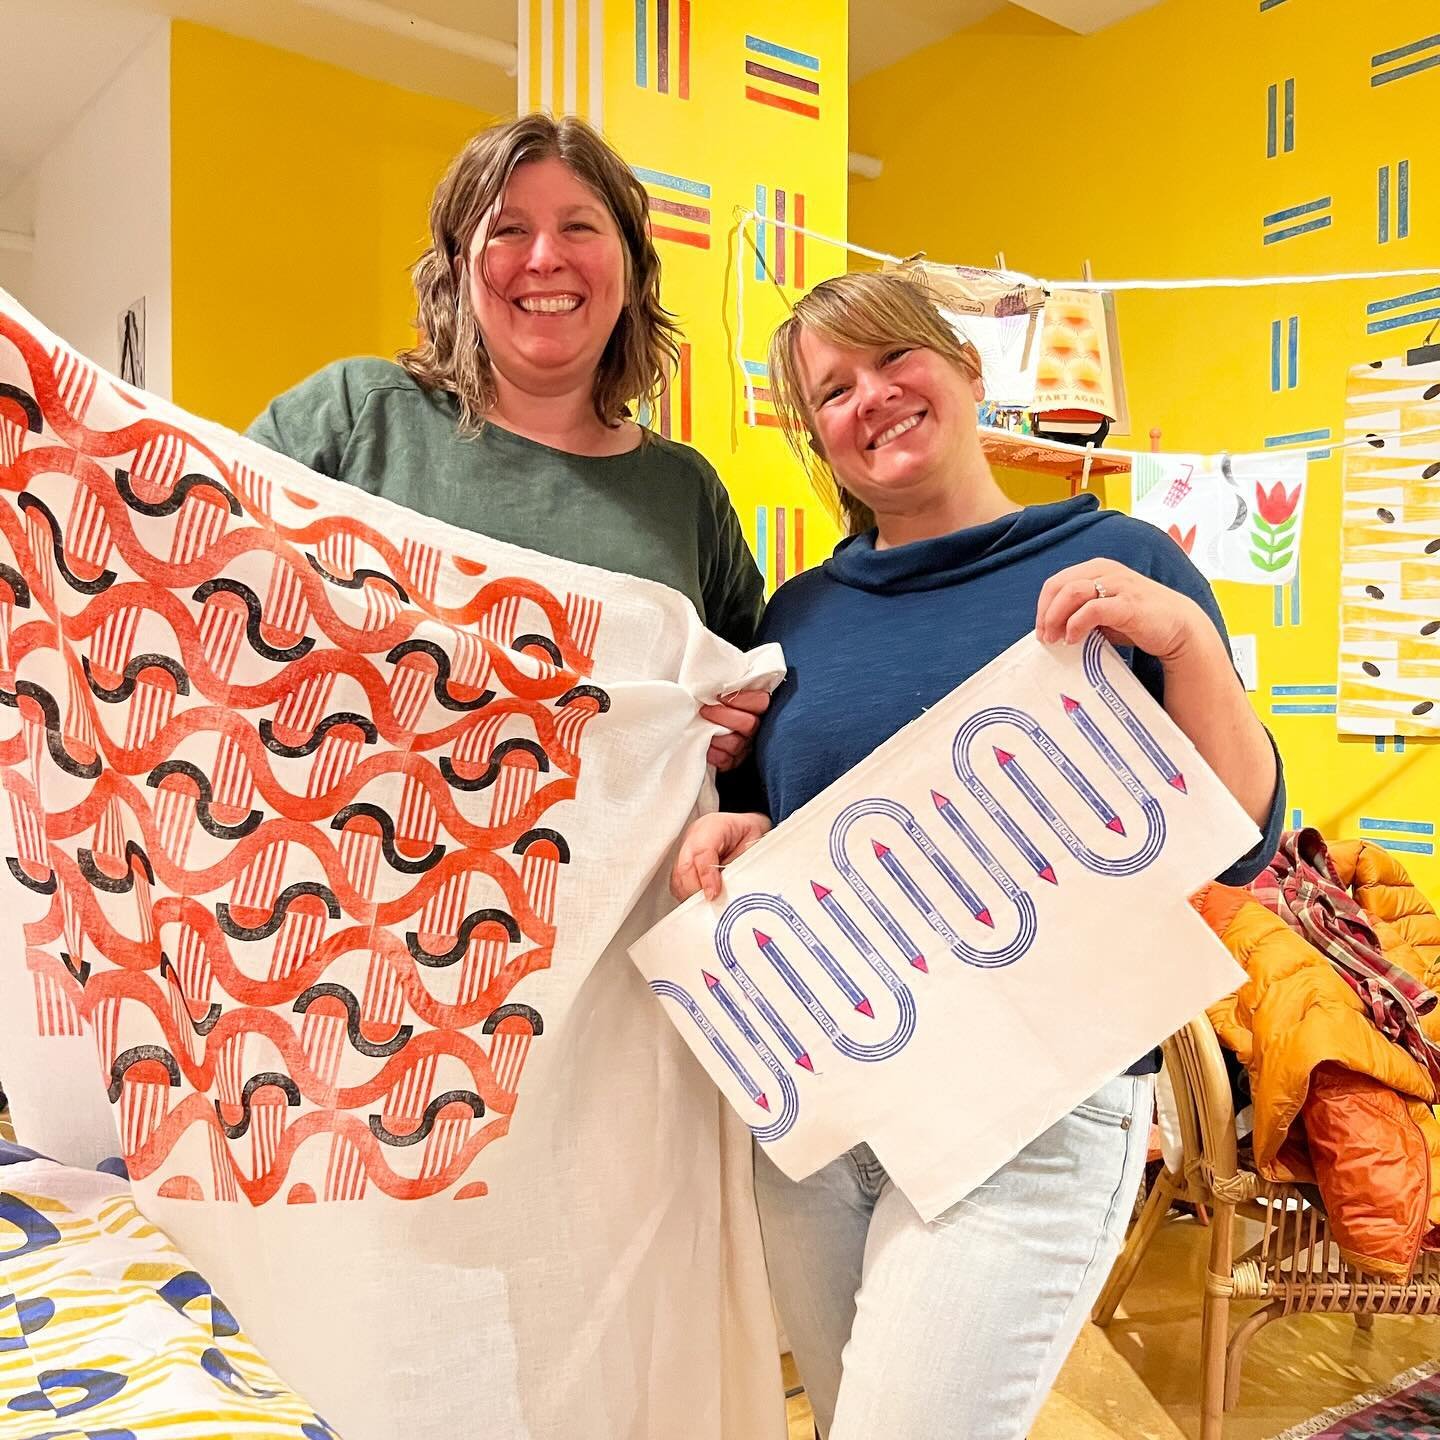 Can we bring back the word groovy, please? 
I&rsquo;ll start&hellip;
These groovy humans filled my studio {&amp; my cup} last night. At the end of the night they each had some fabulously groovy block-printed pieces of functional art. 🫶
.
.
#groovy #